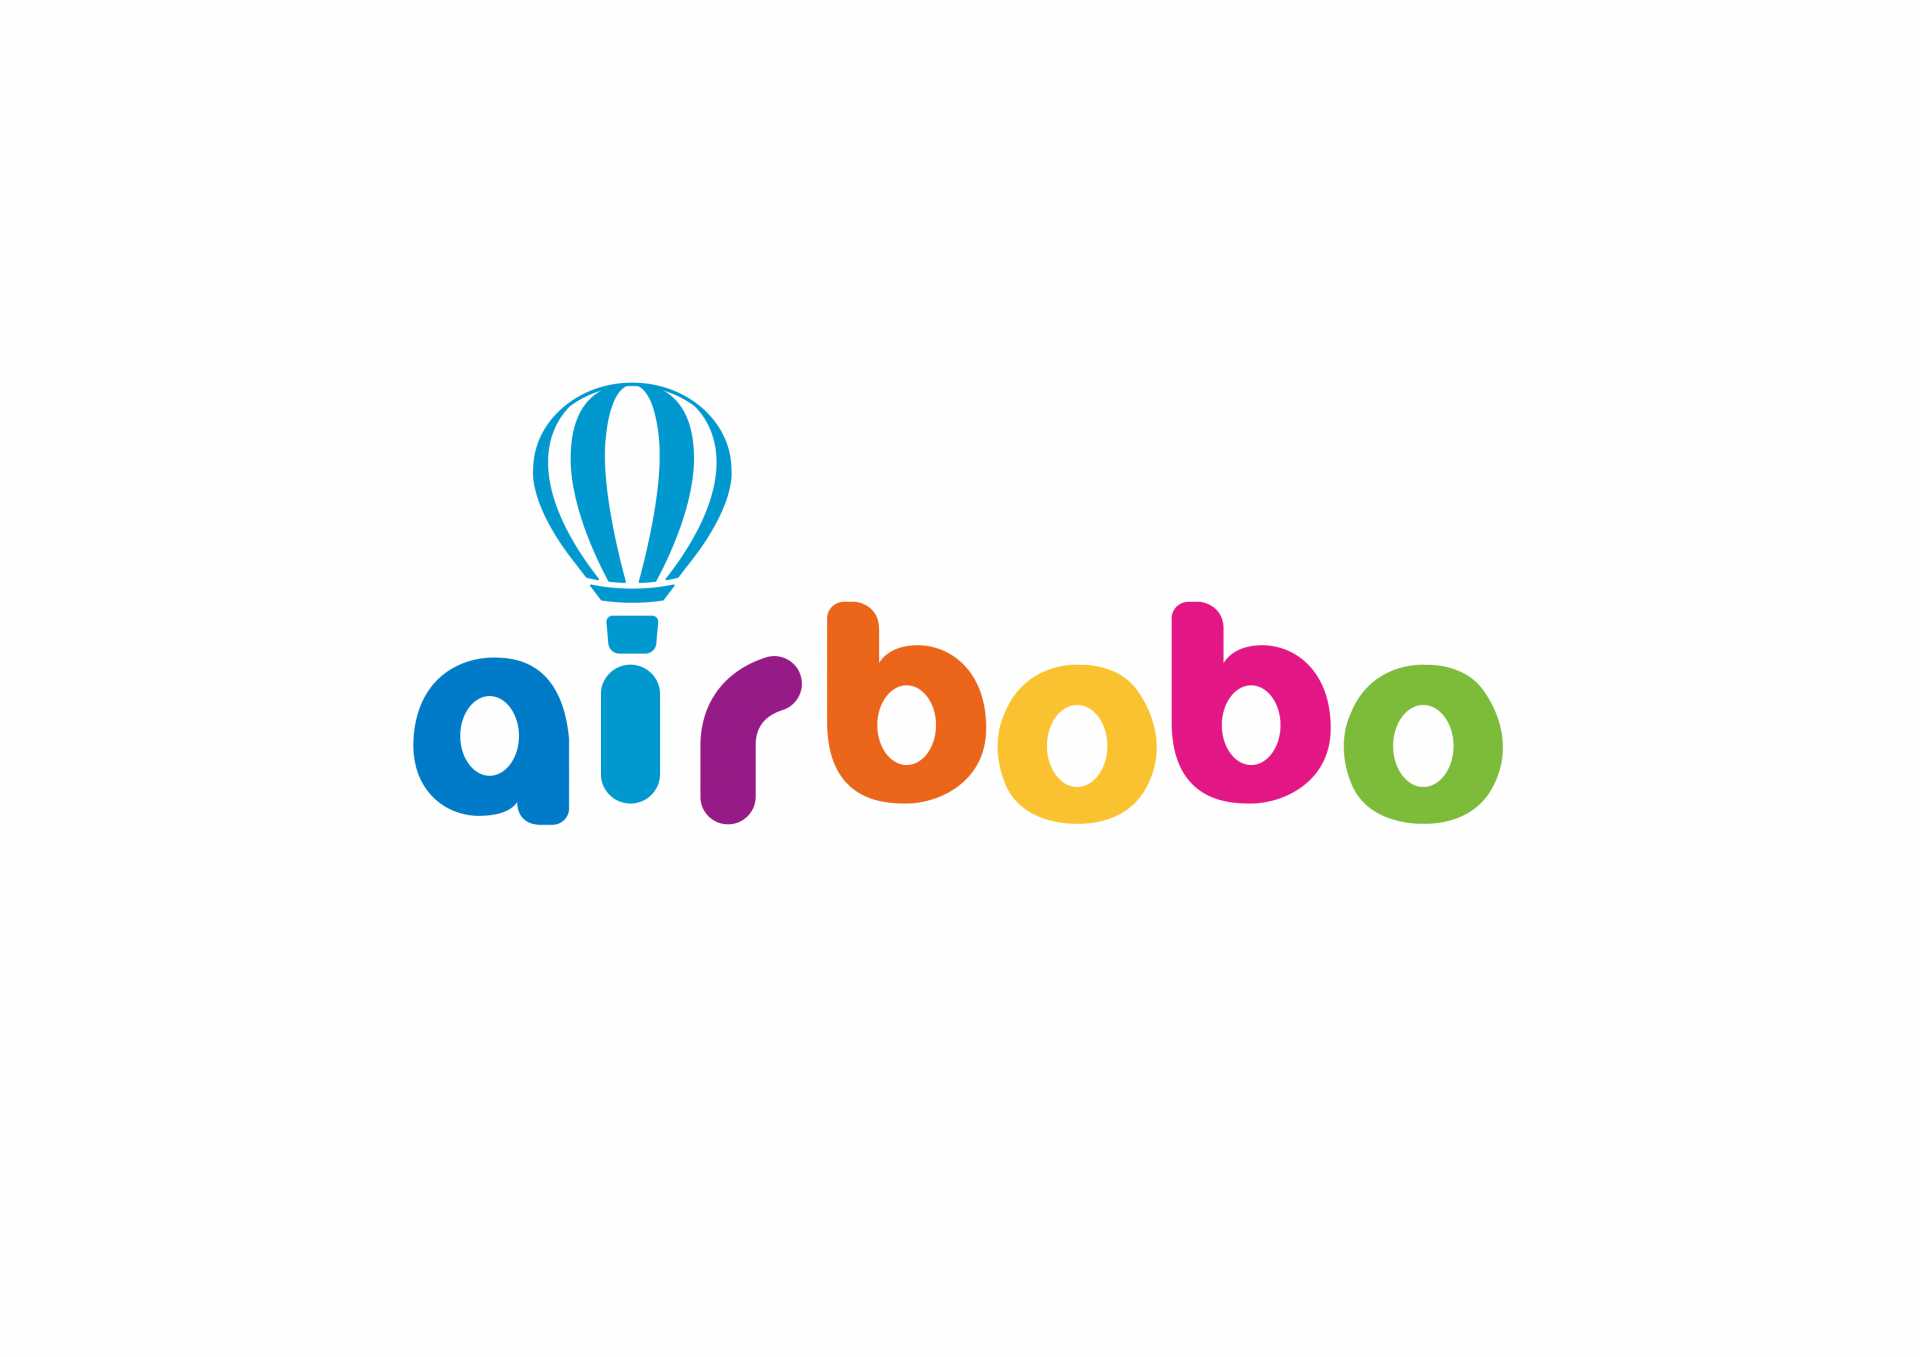 Airbobo